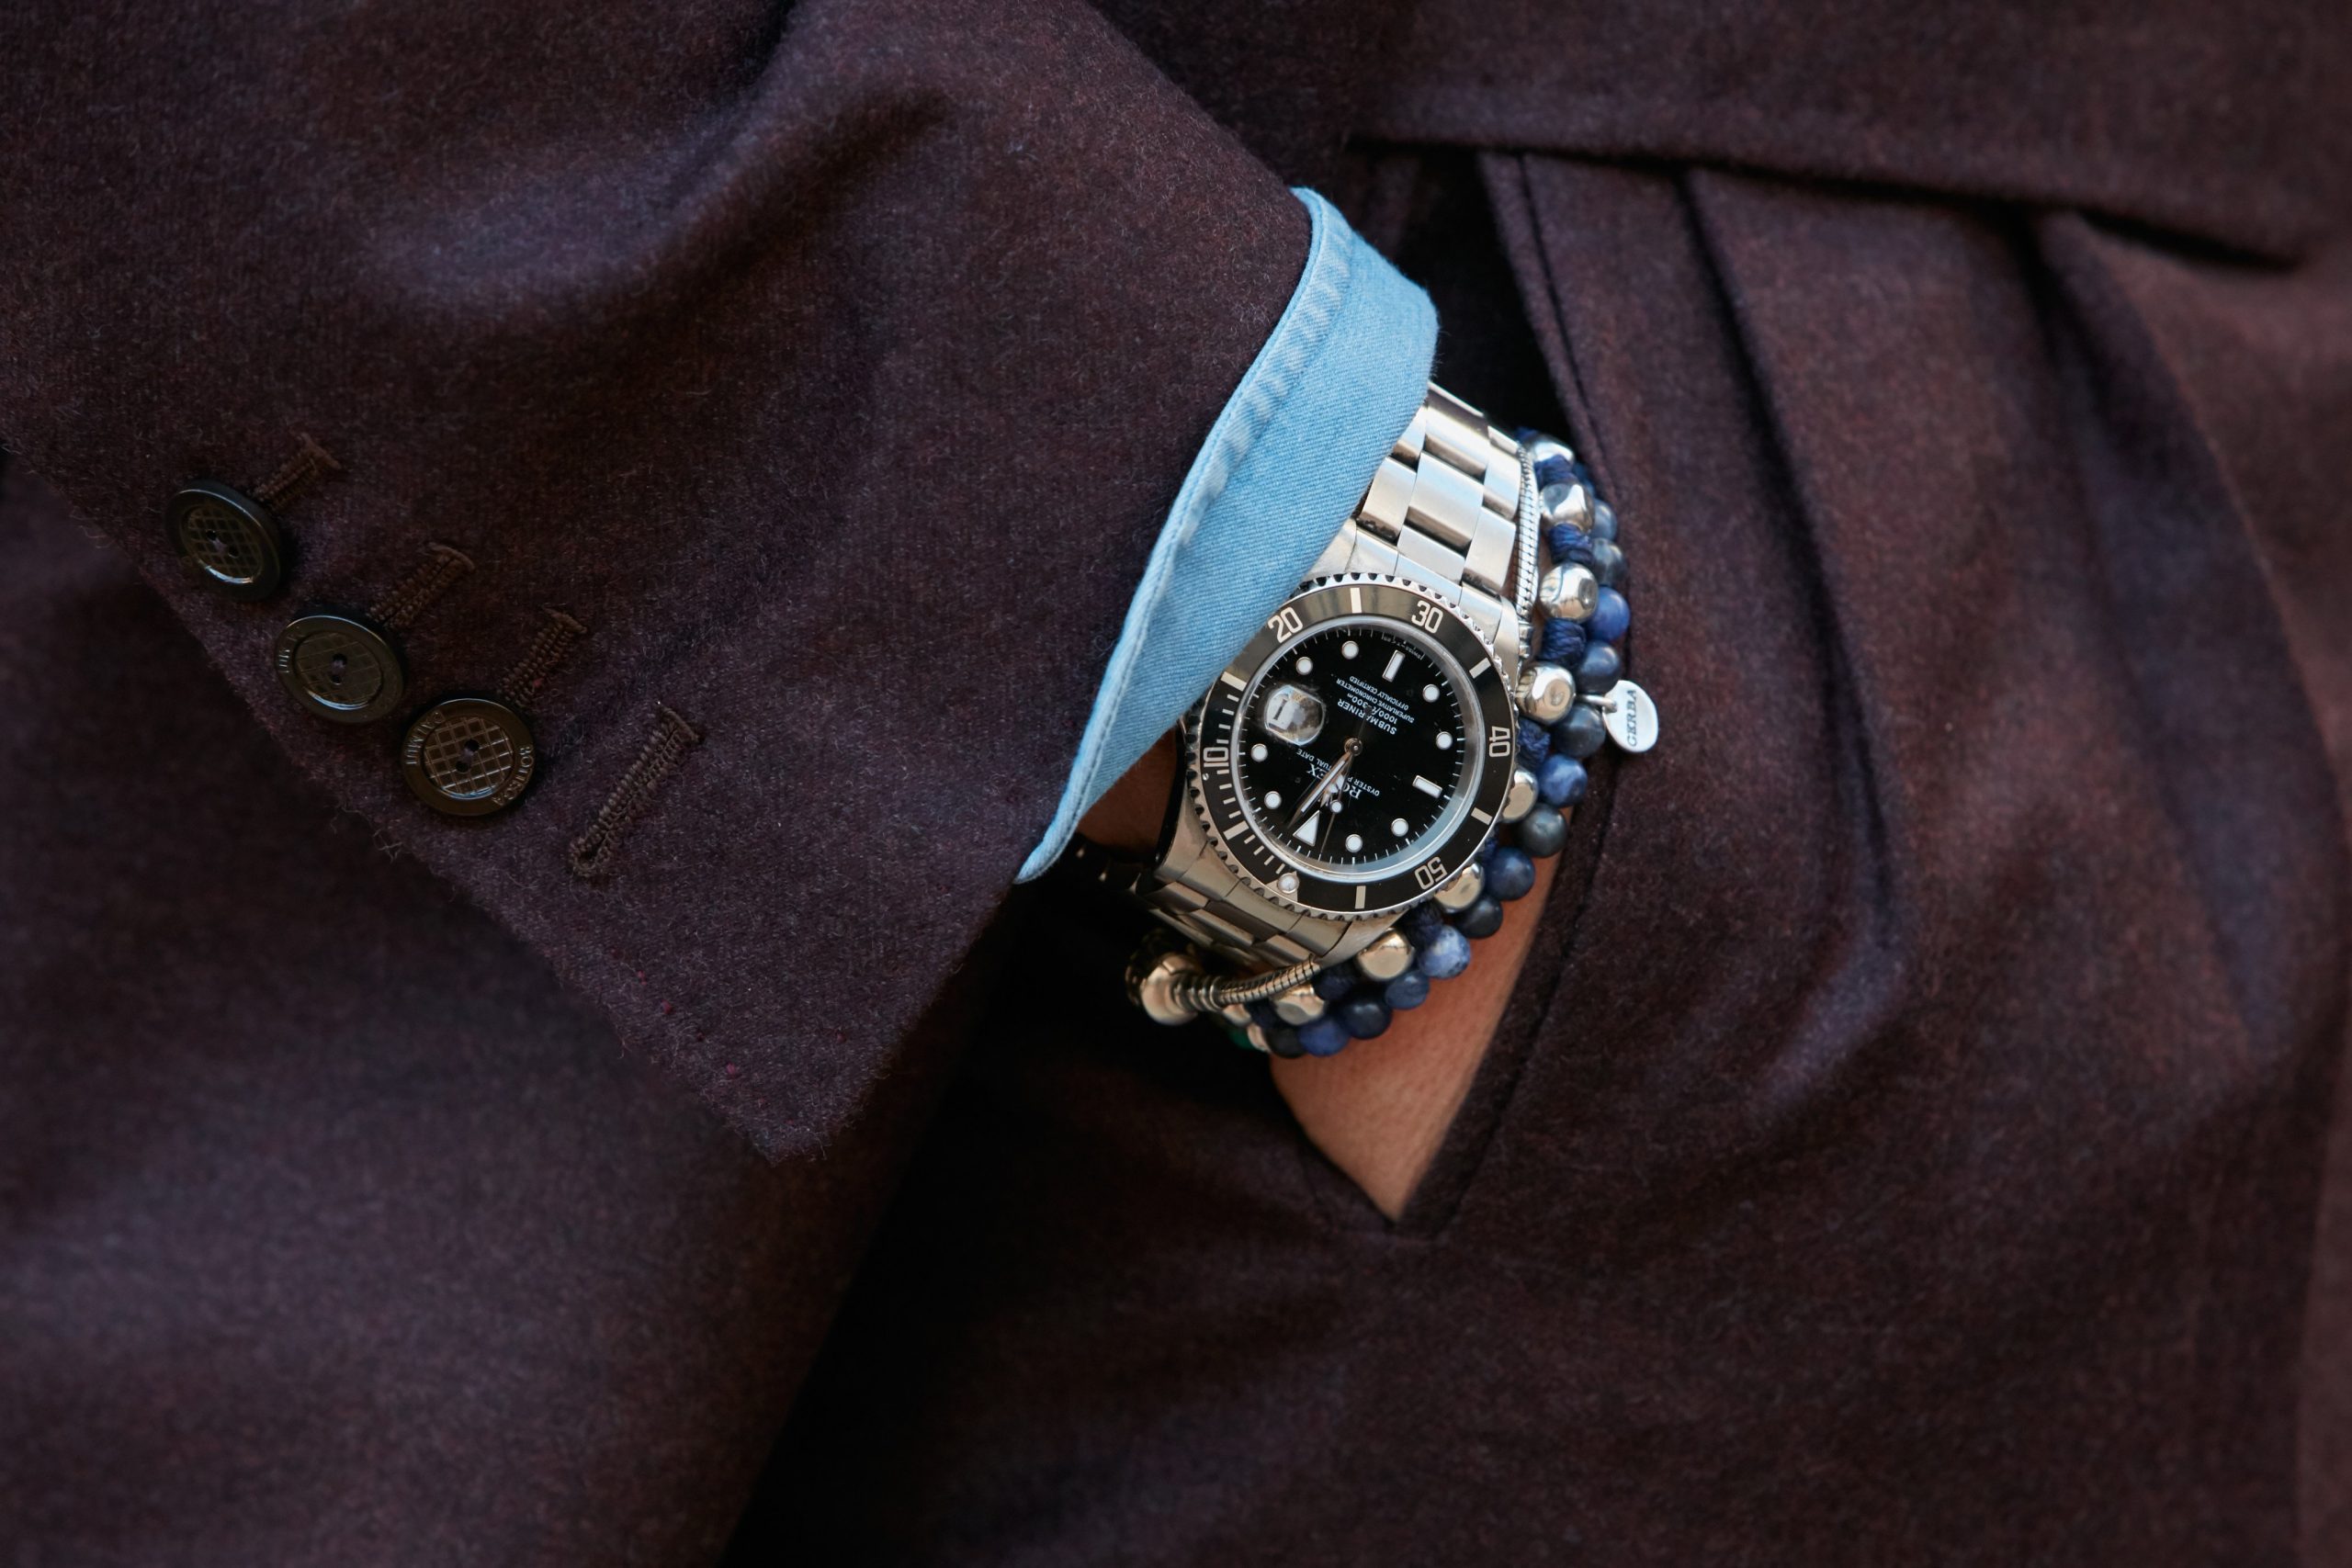 Why Is Rolex Such A Good Brand?